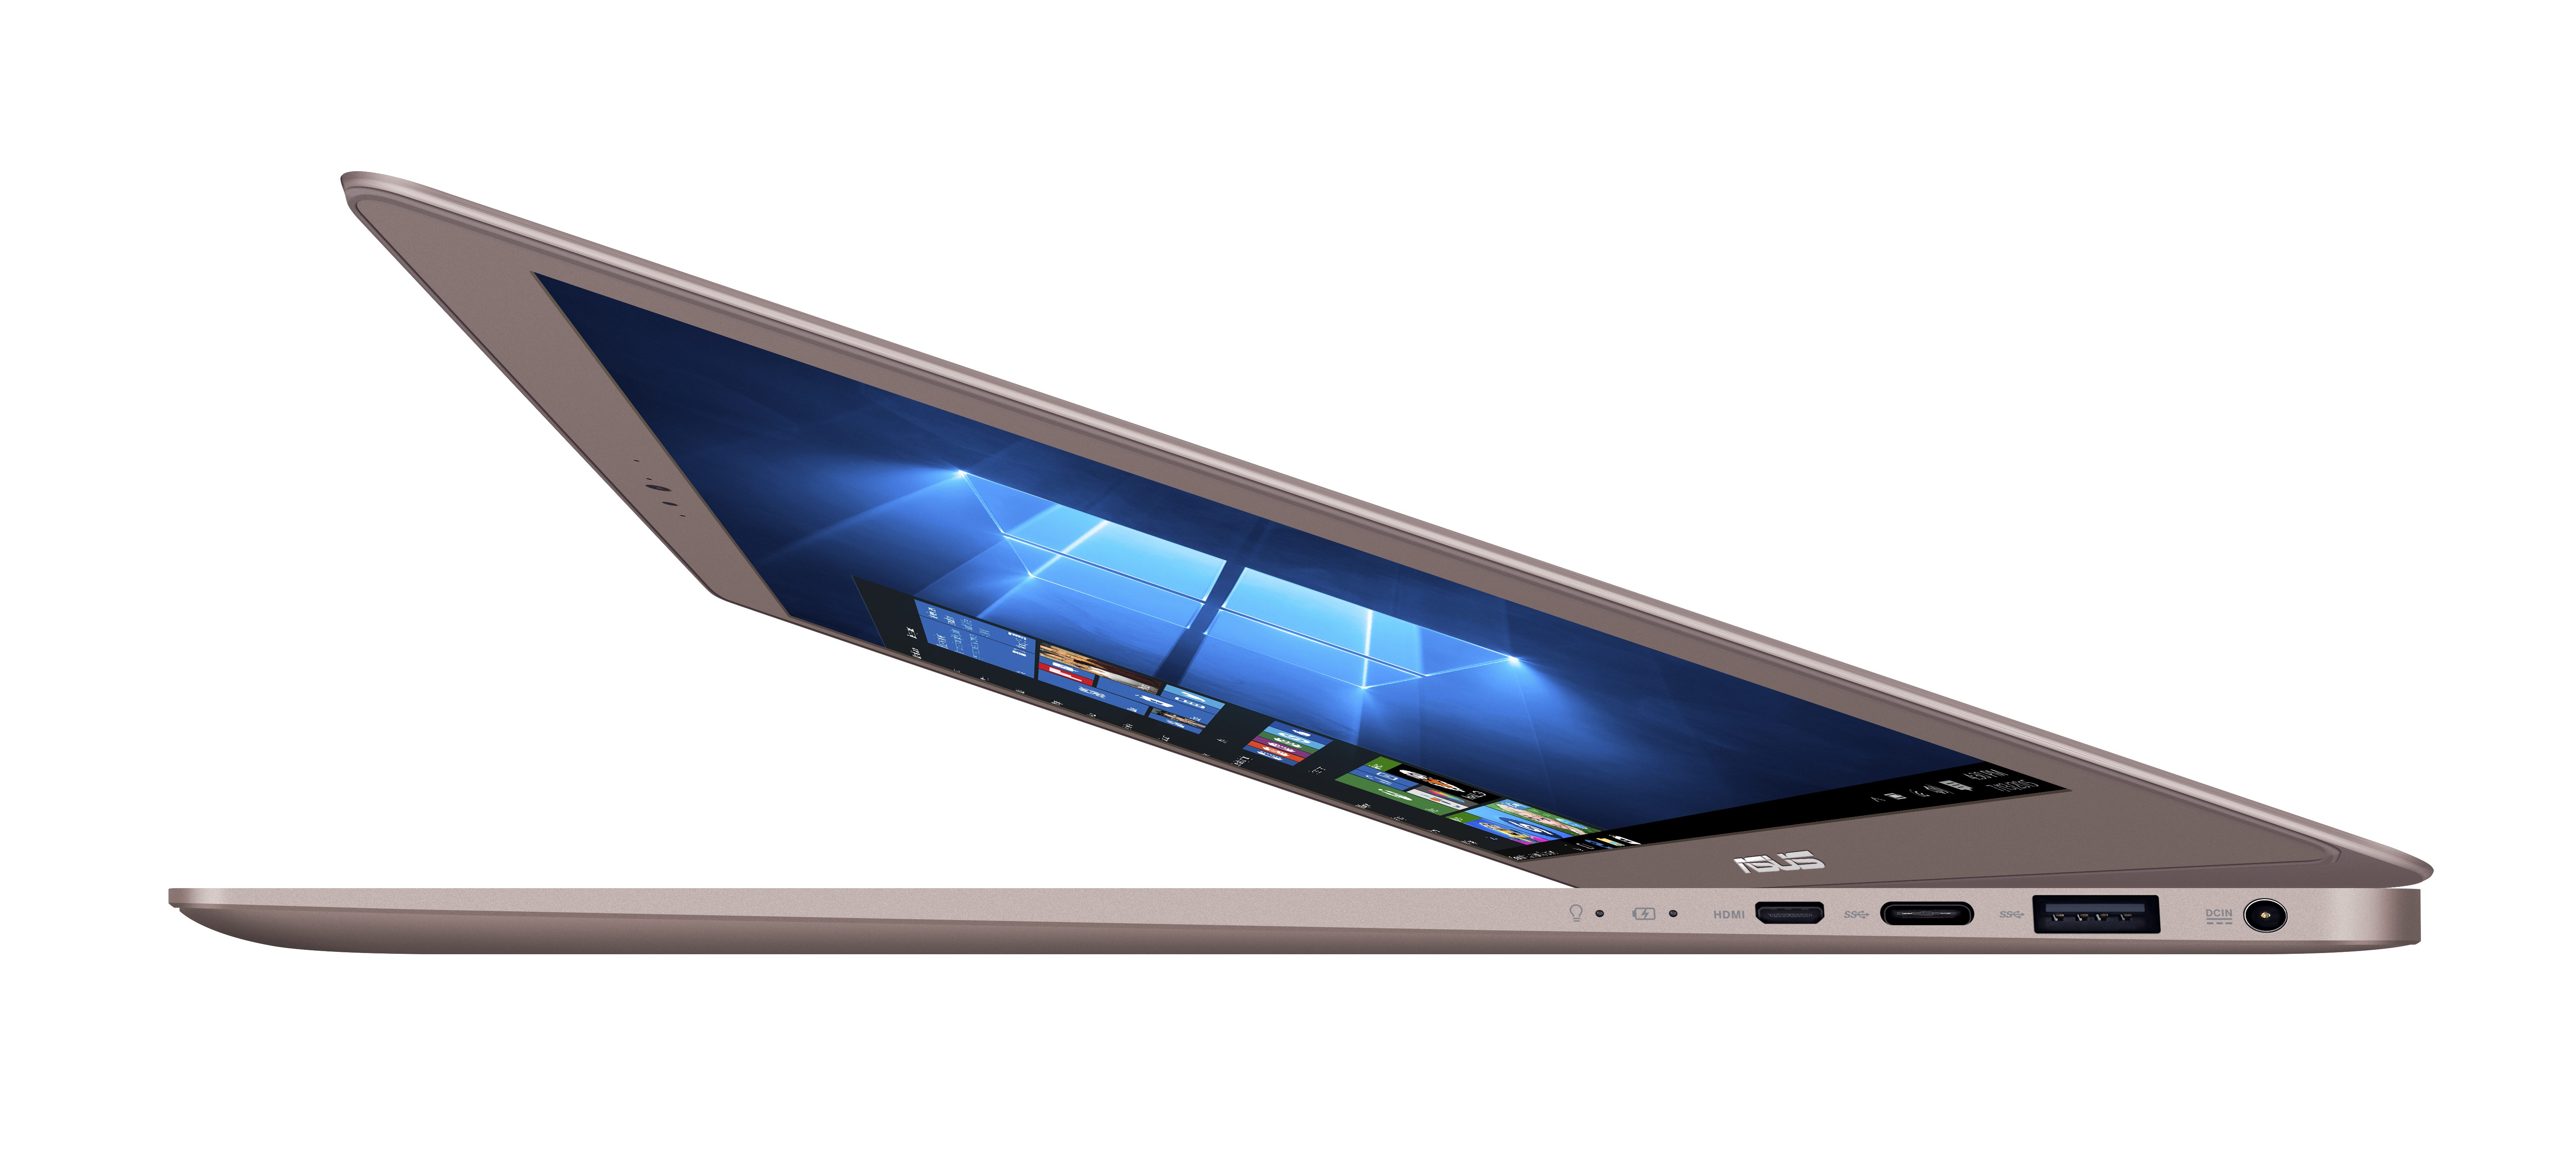 ASUS unveils ZenBook UX330, one of the slimmest and lightest 13.3-inch clamshell notebooks in the world